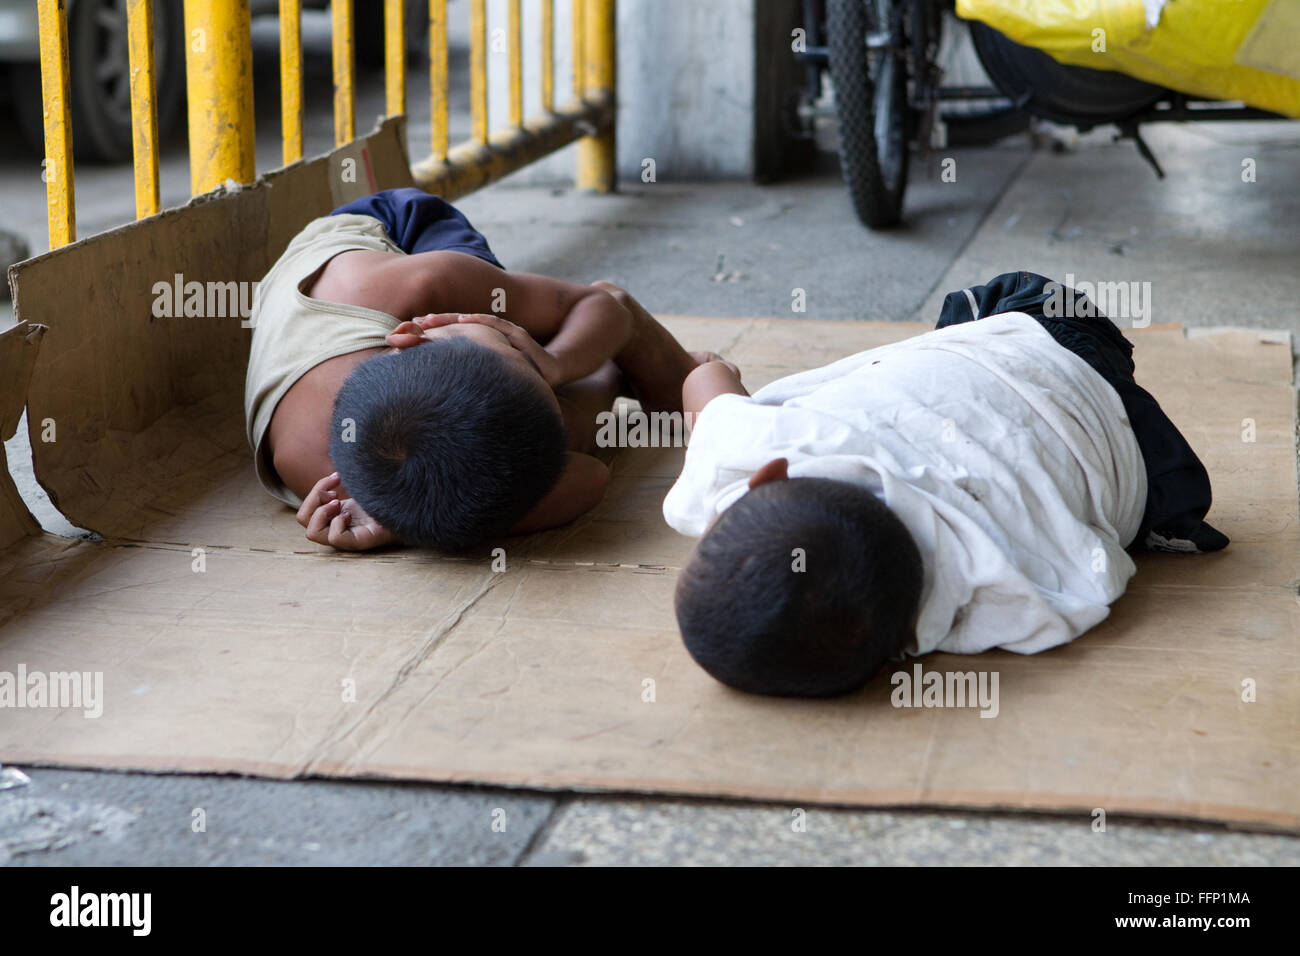 Within Philippine Cities homeless people,which include children & entire families can be seen sleeping on sidewalks. Stock Photo